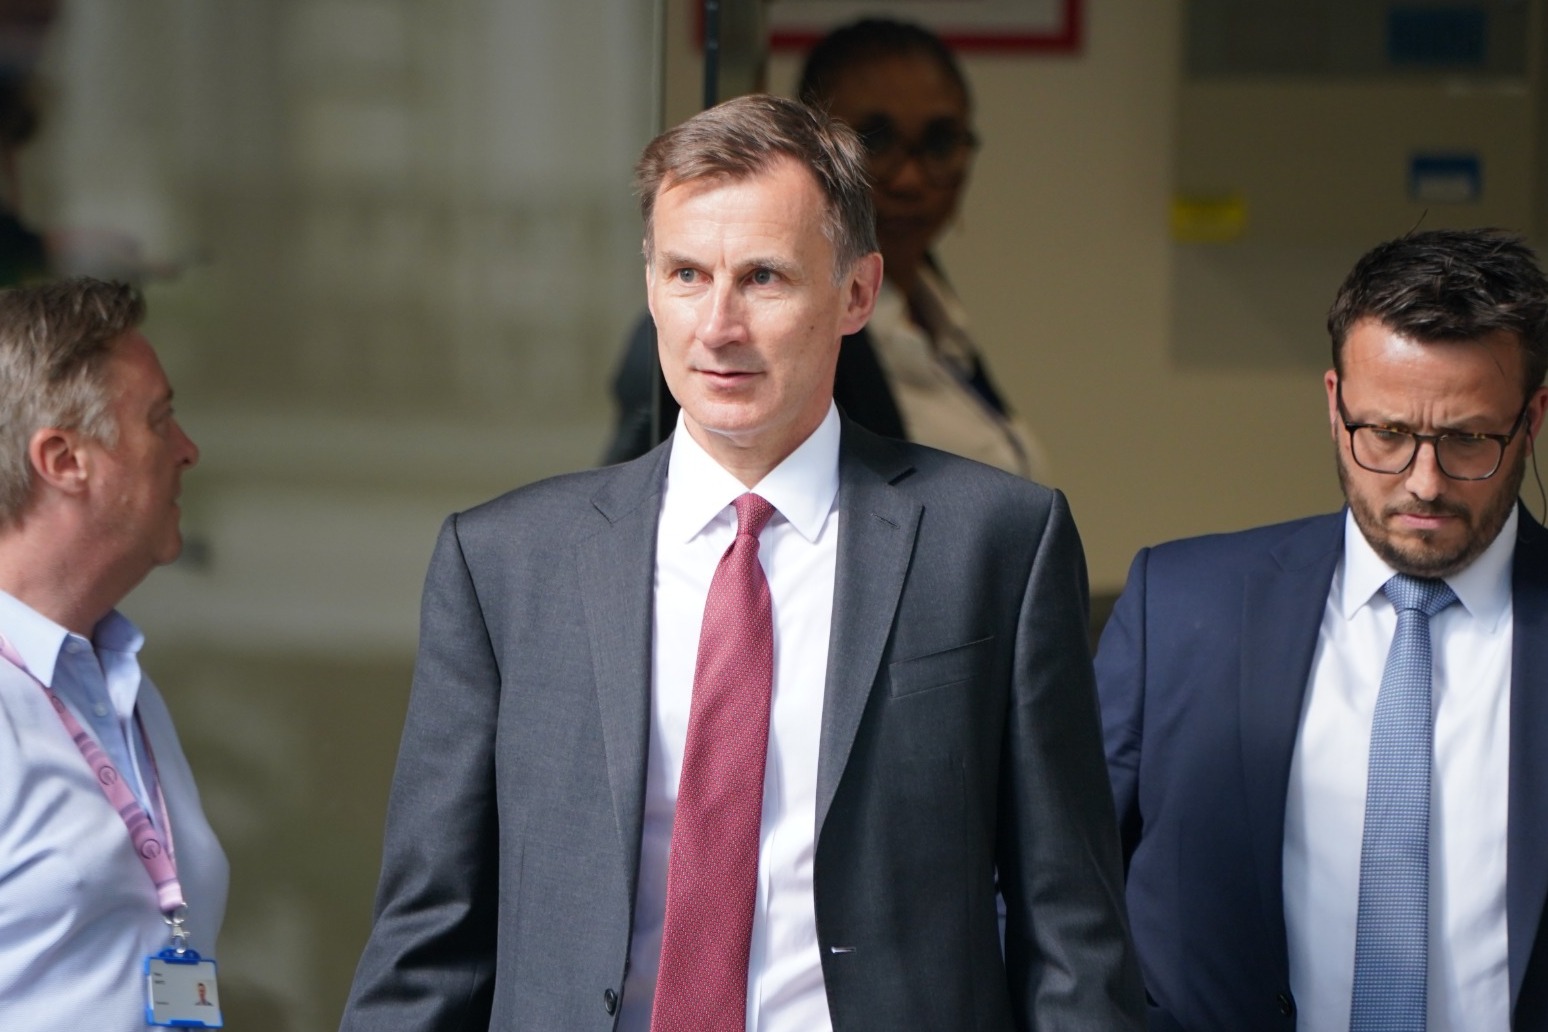 Hunt meets with lenders as mortgage crisis worsens 